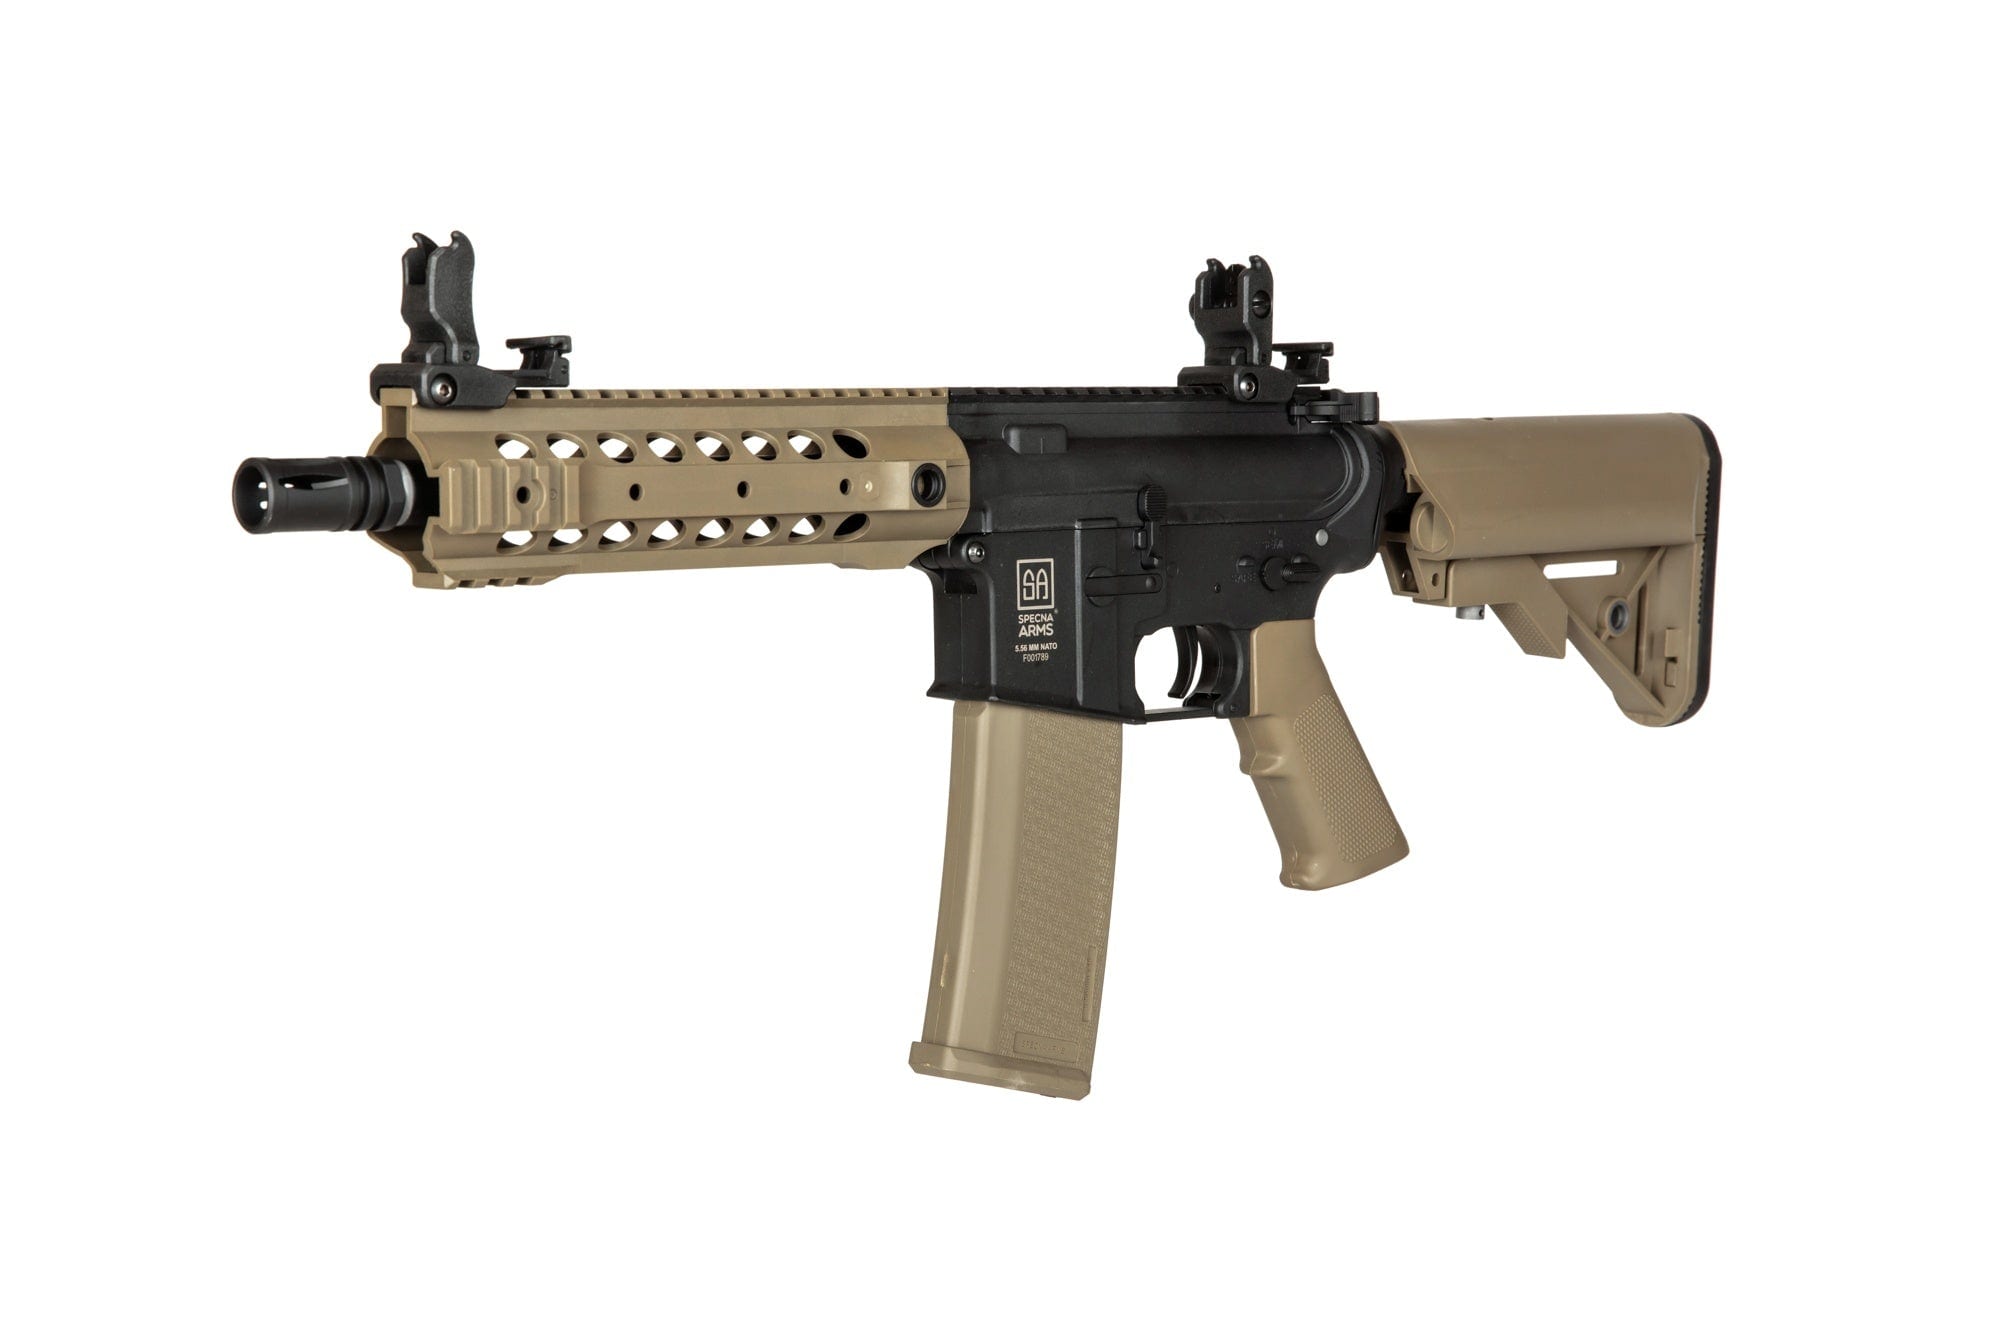 FLEX™ is the new line of airsoft replicas manufactured by Specna Arms and characterised by an attractive price combined with innovative quick spring replacement system and high quality materials.